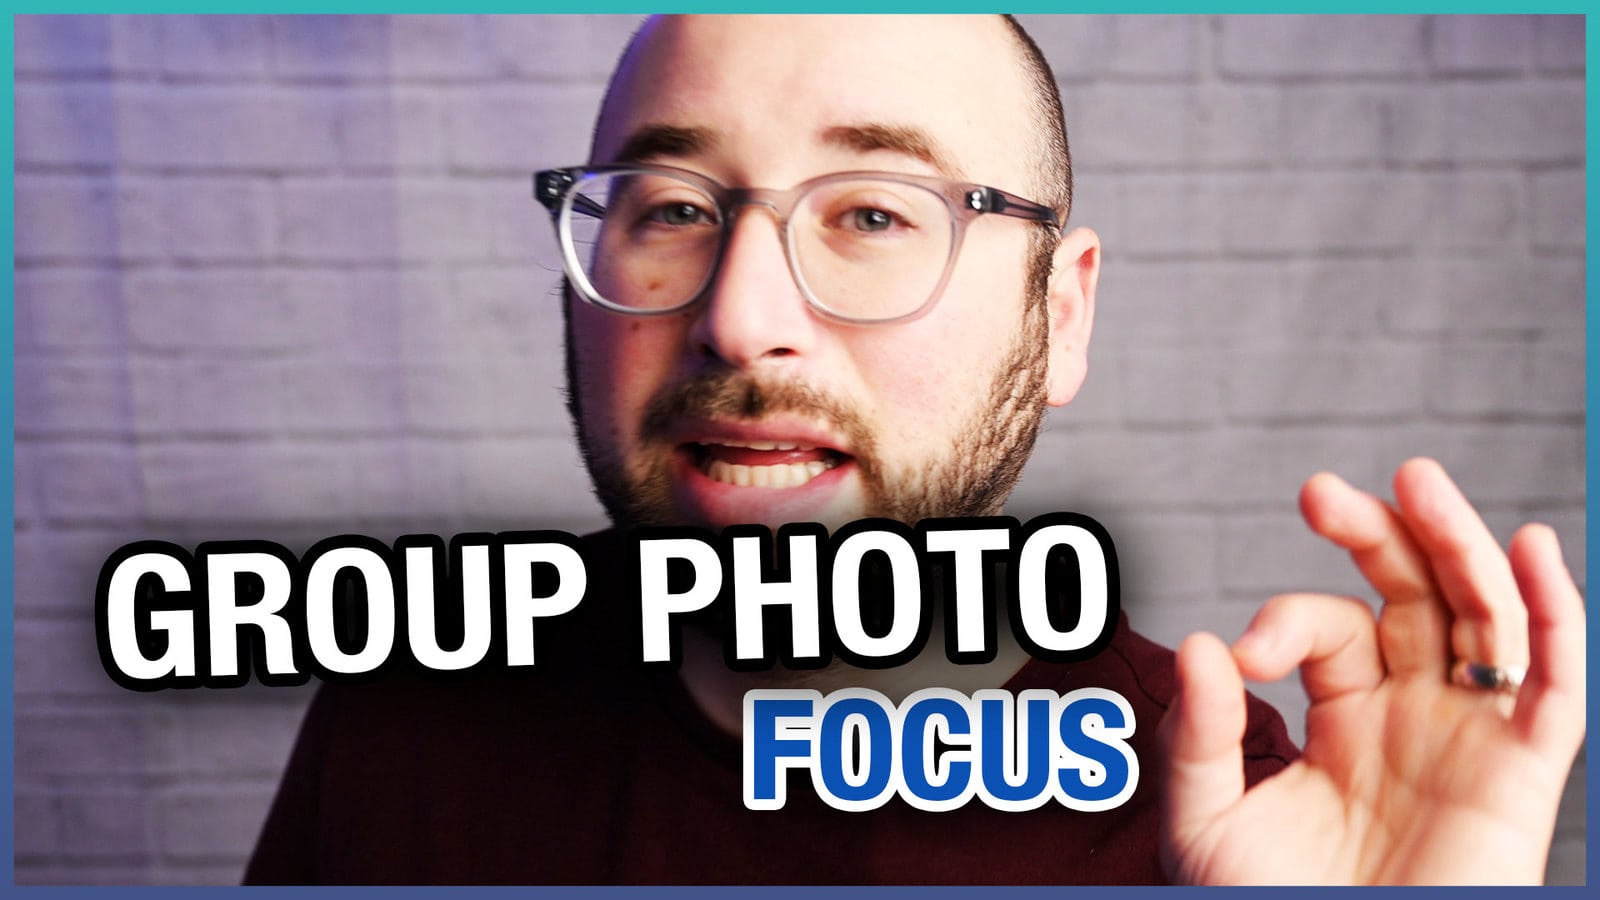 How To Get Everyone In Focus In A Group Photo